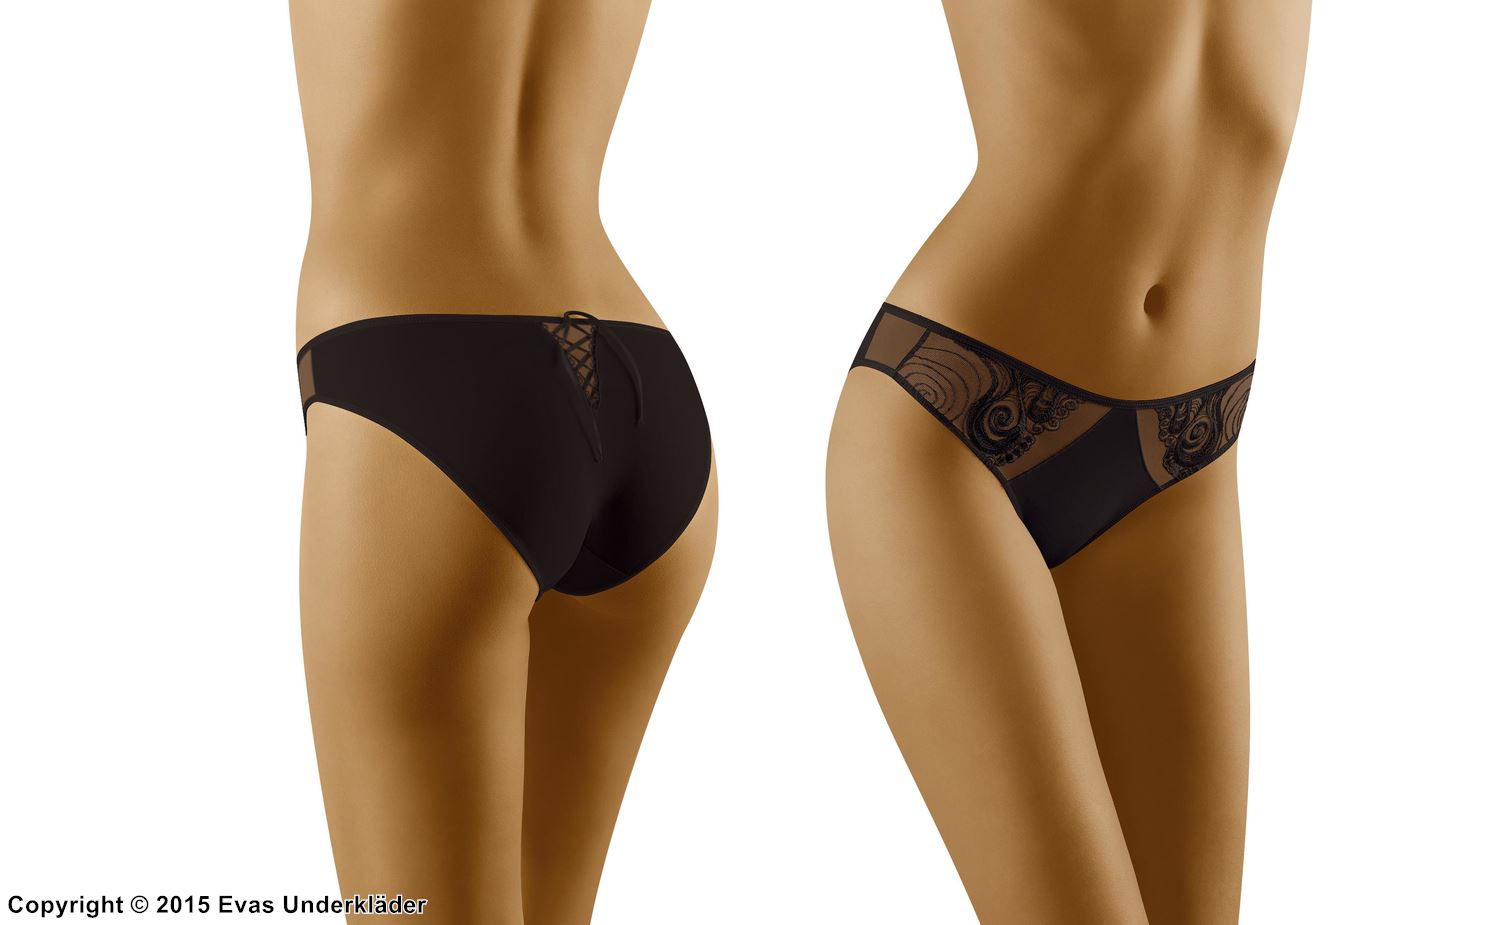 Classic briefs, high quality microfiber, embroidery, lacing